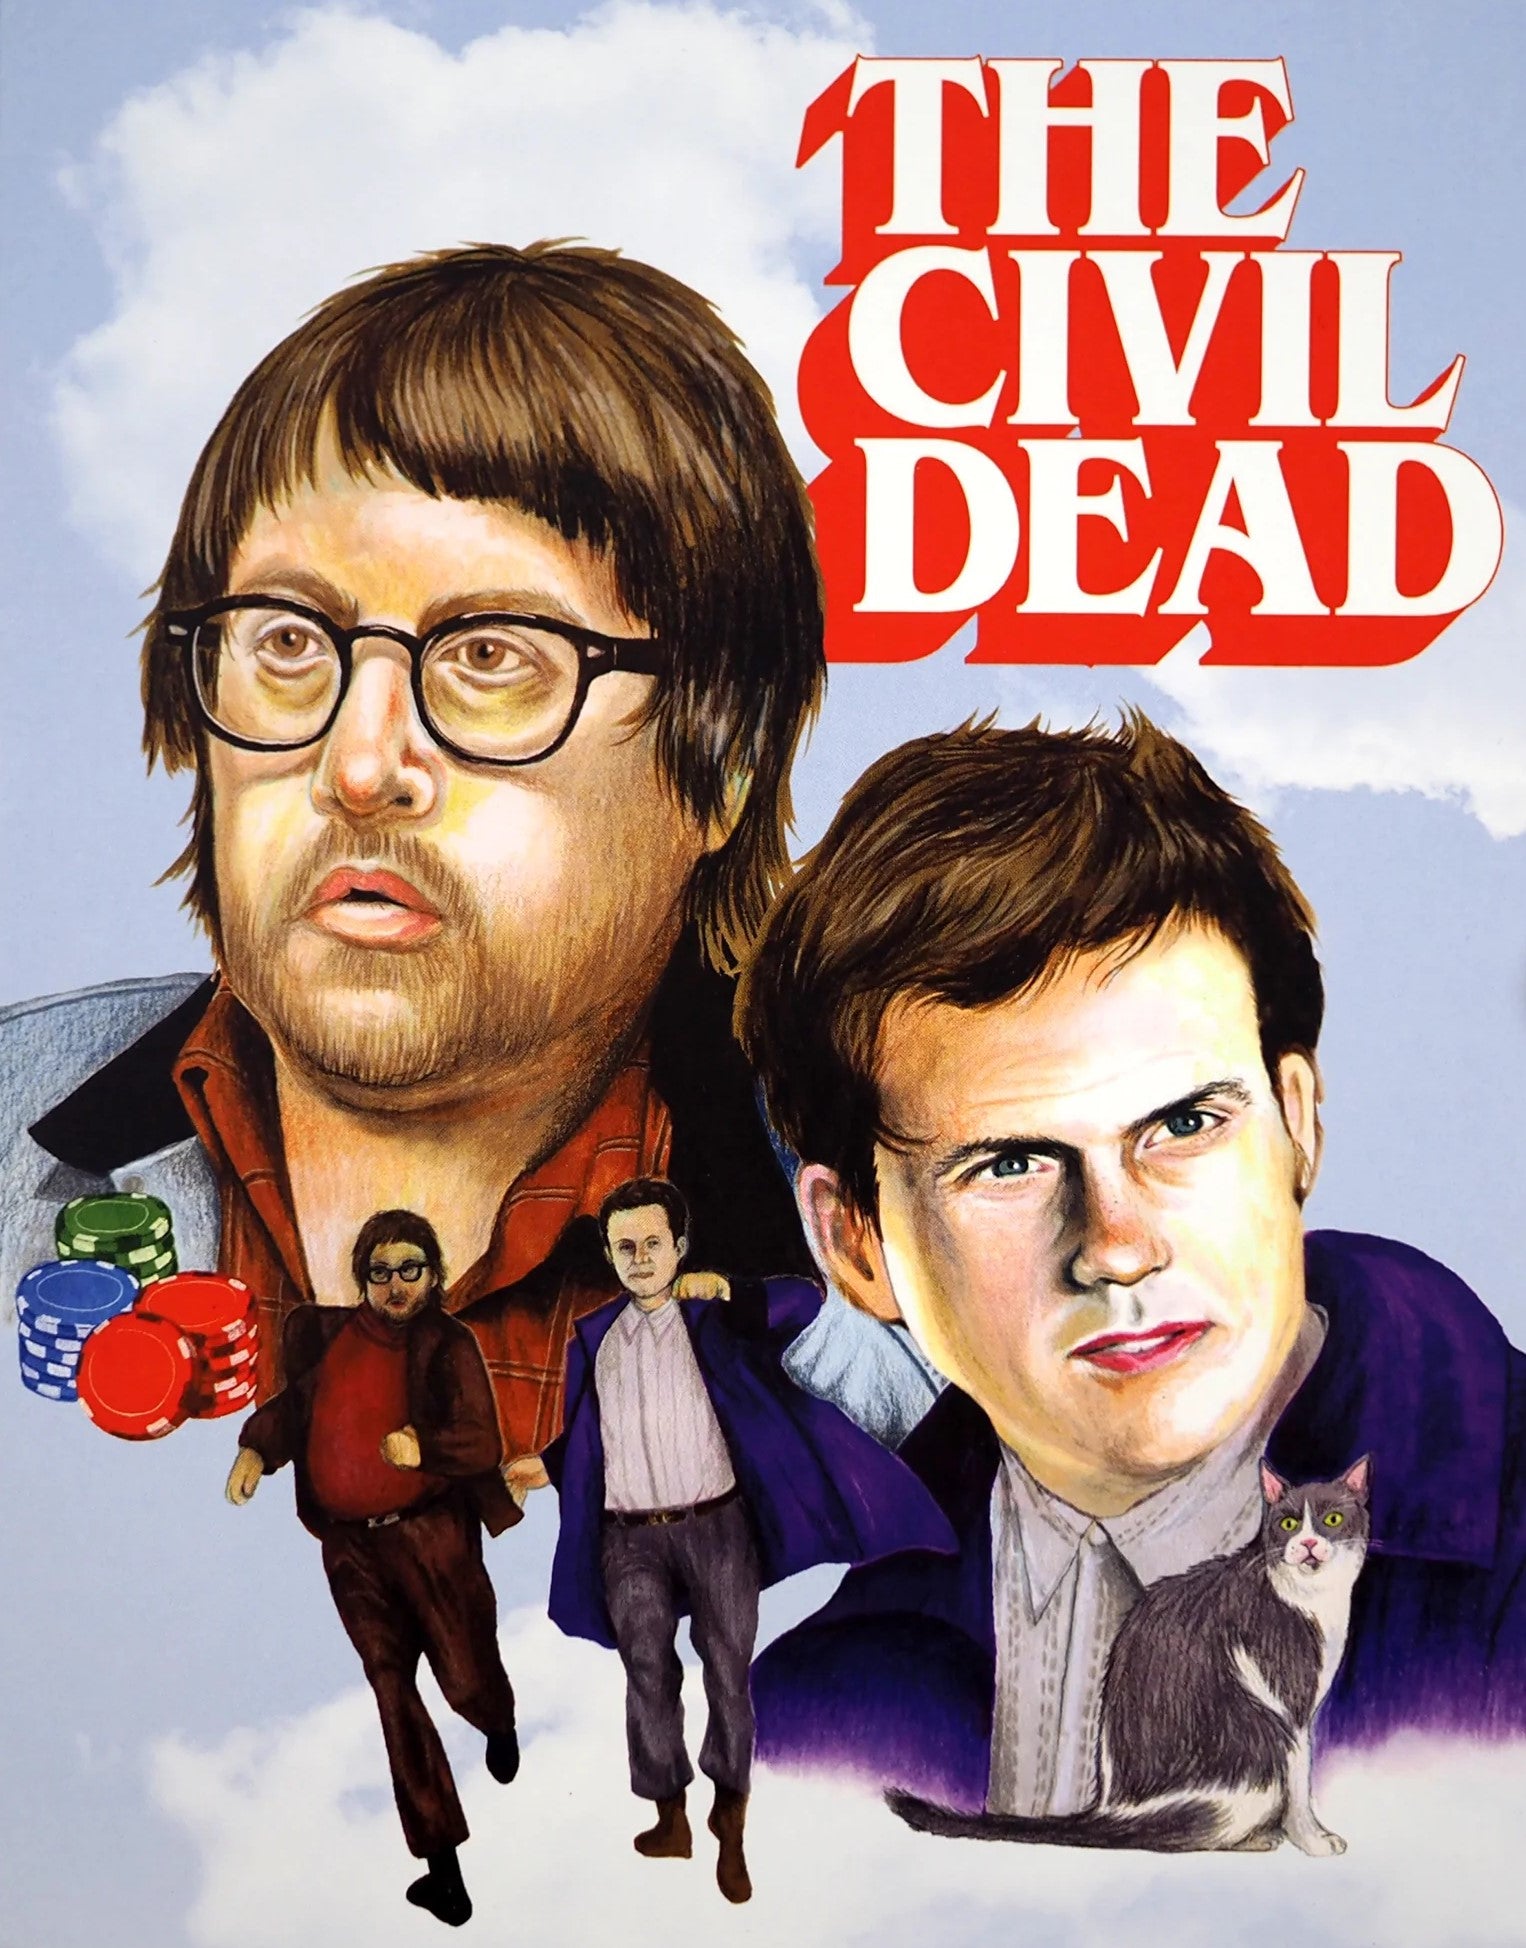 THE CIVIL DEAD (LIMITED EDITION) BLU-RAY